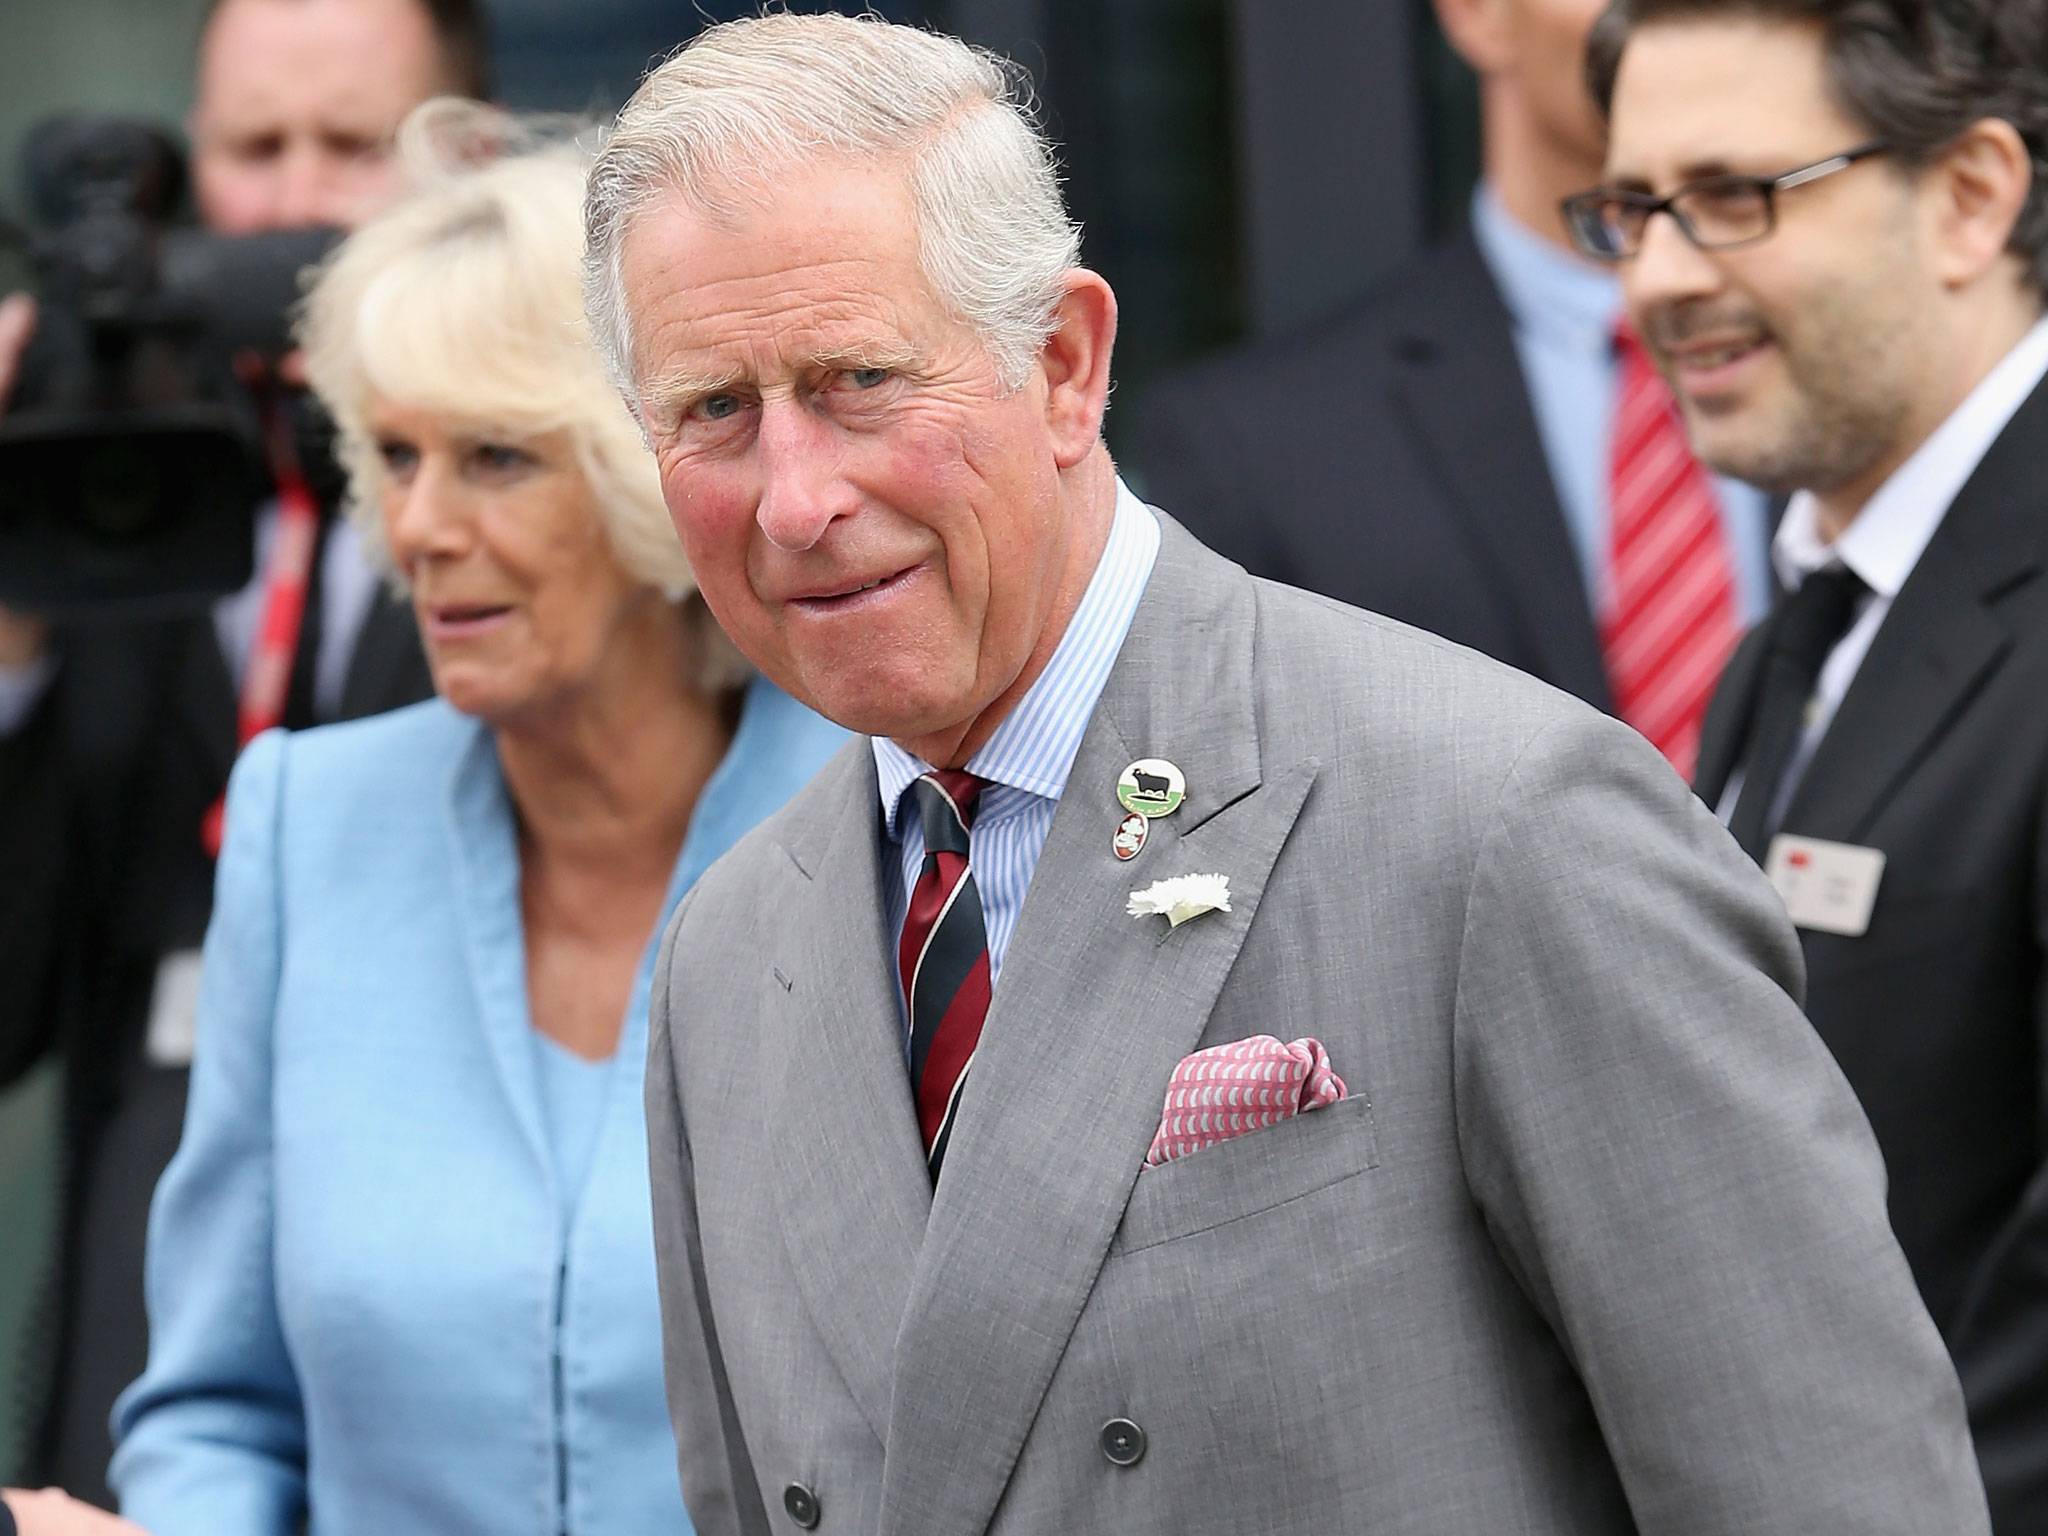 He's at it again: Prince Charles accused of lobbying Health